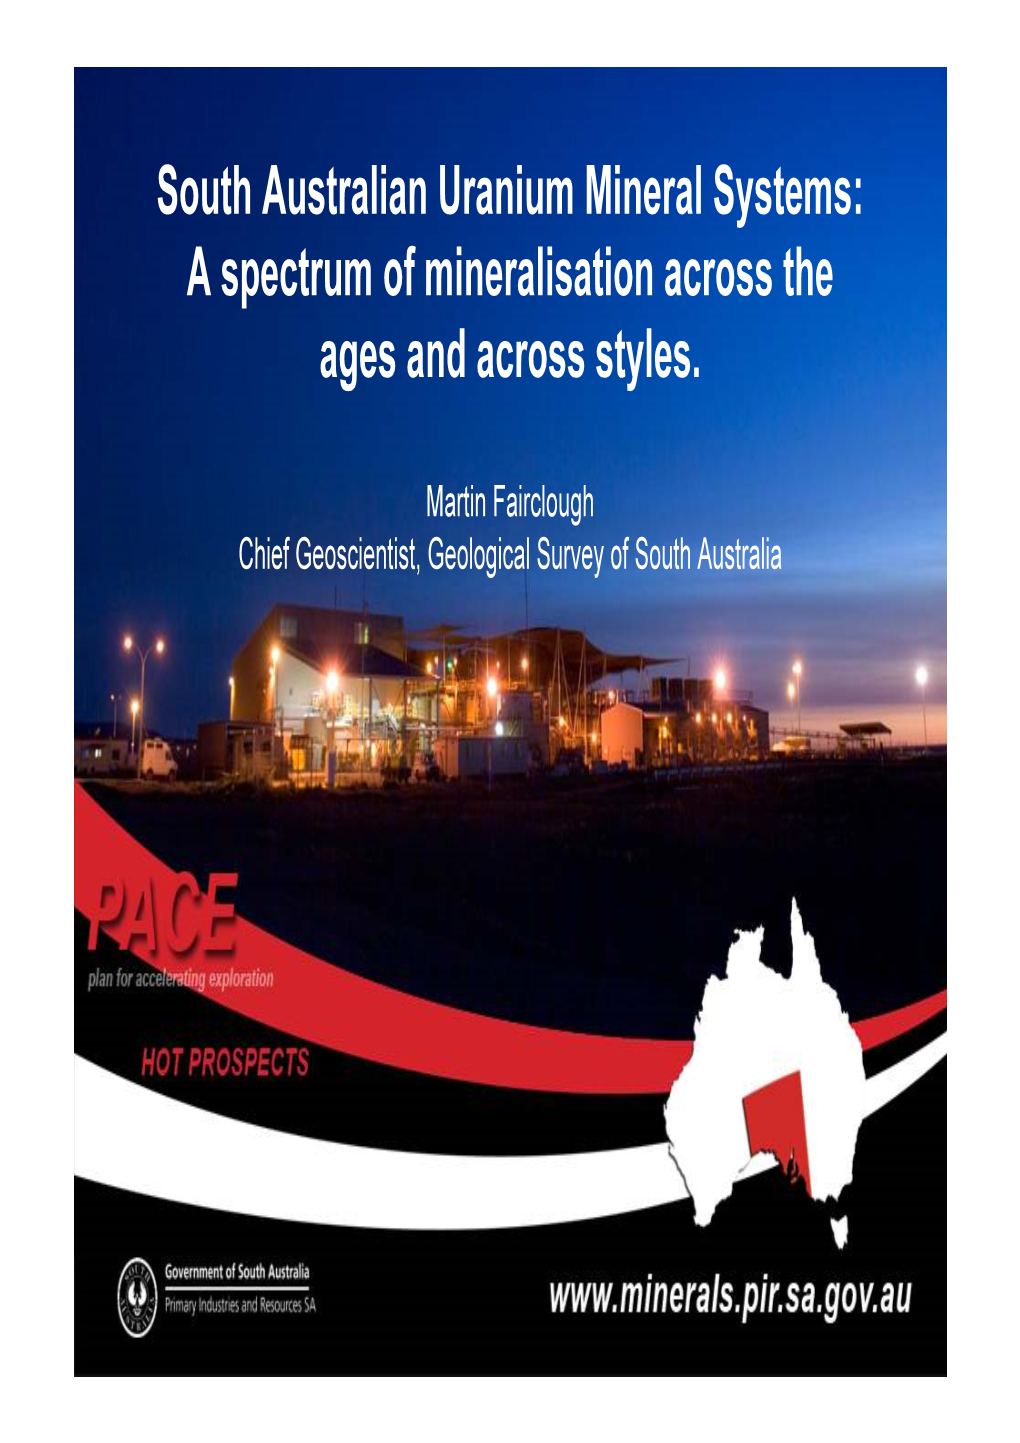 South Australian Uranium Mineral Systems: a Spectrum of Mineralisation Across the Ages and Across Styles